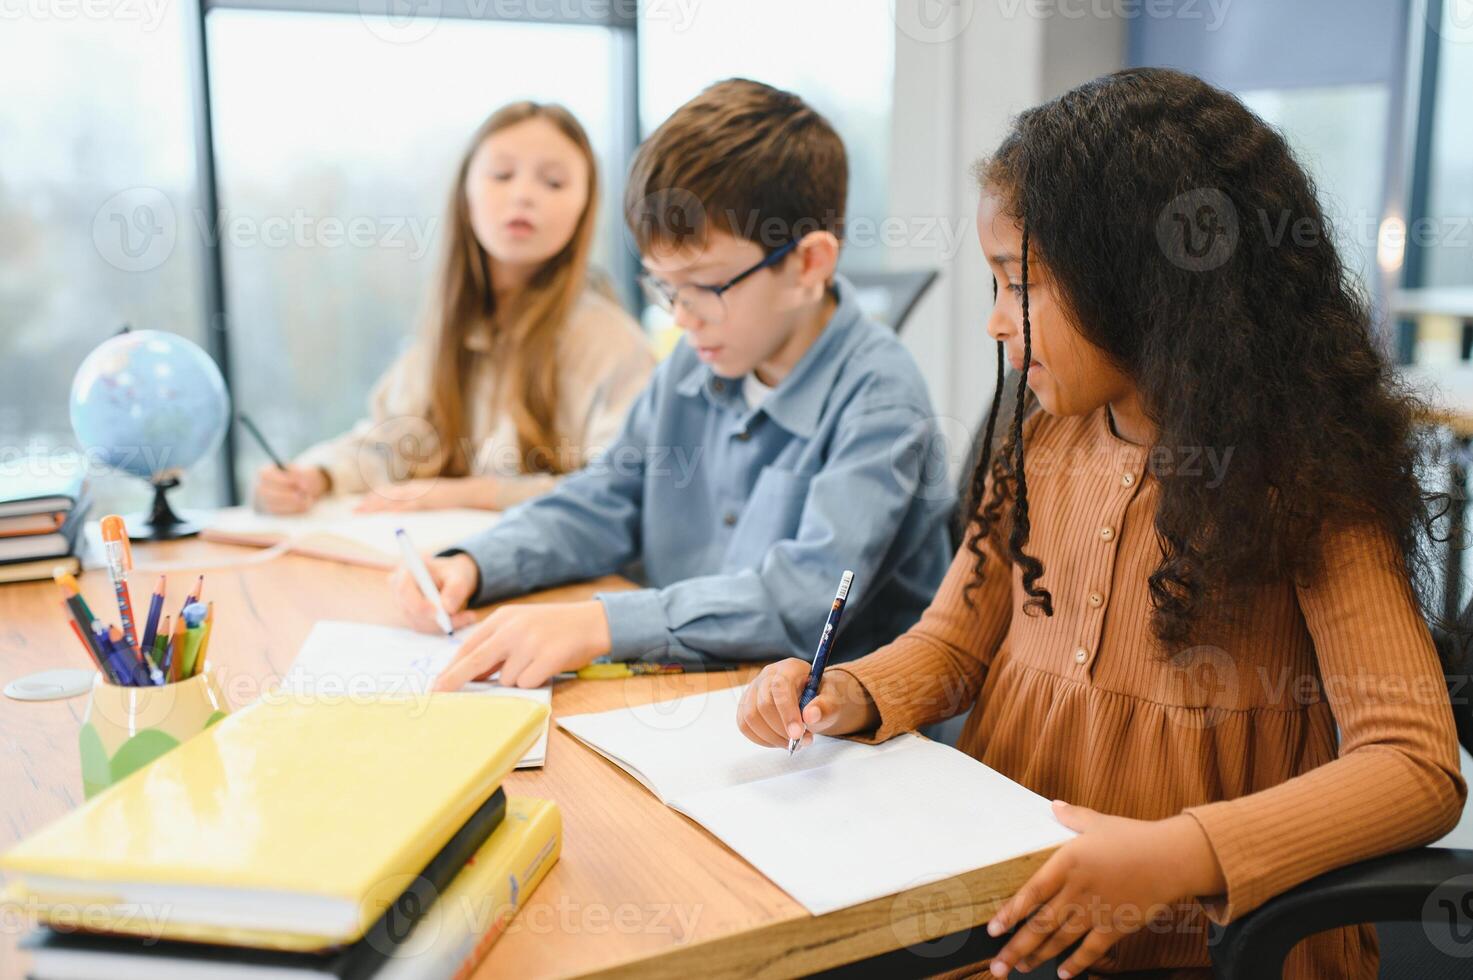 Focused multiracial students kids writing down data into notebook while sitting at table photo